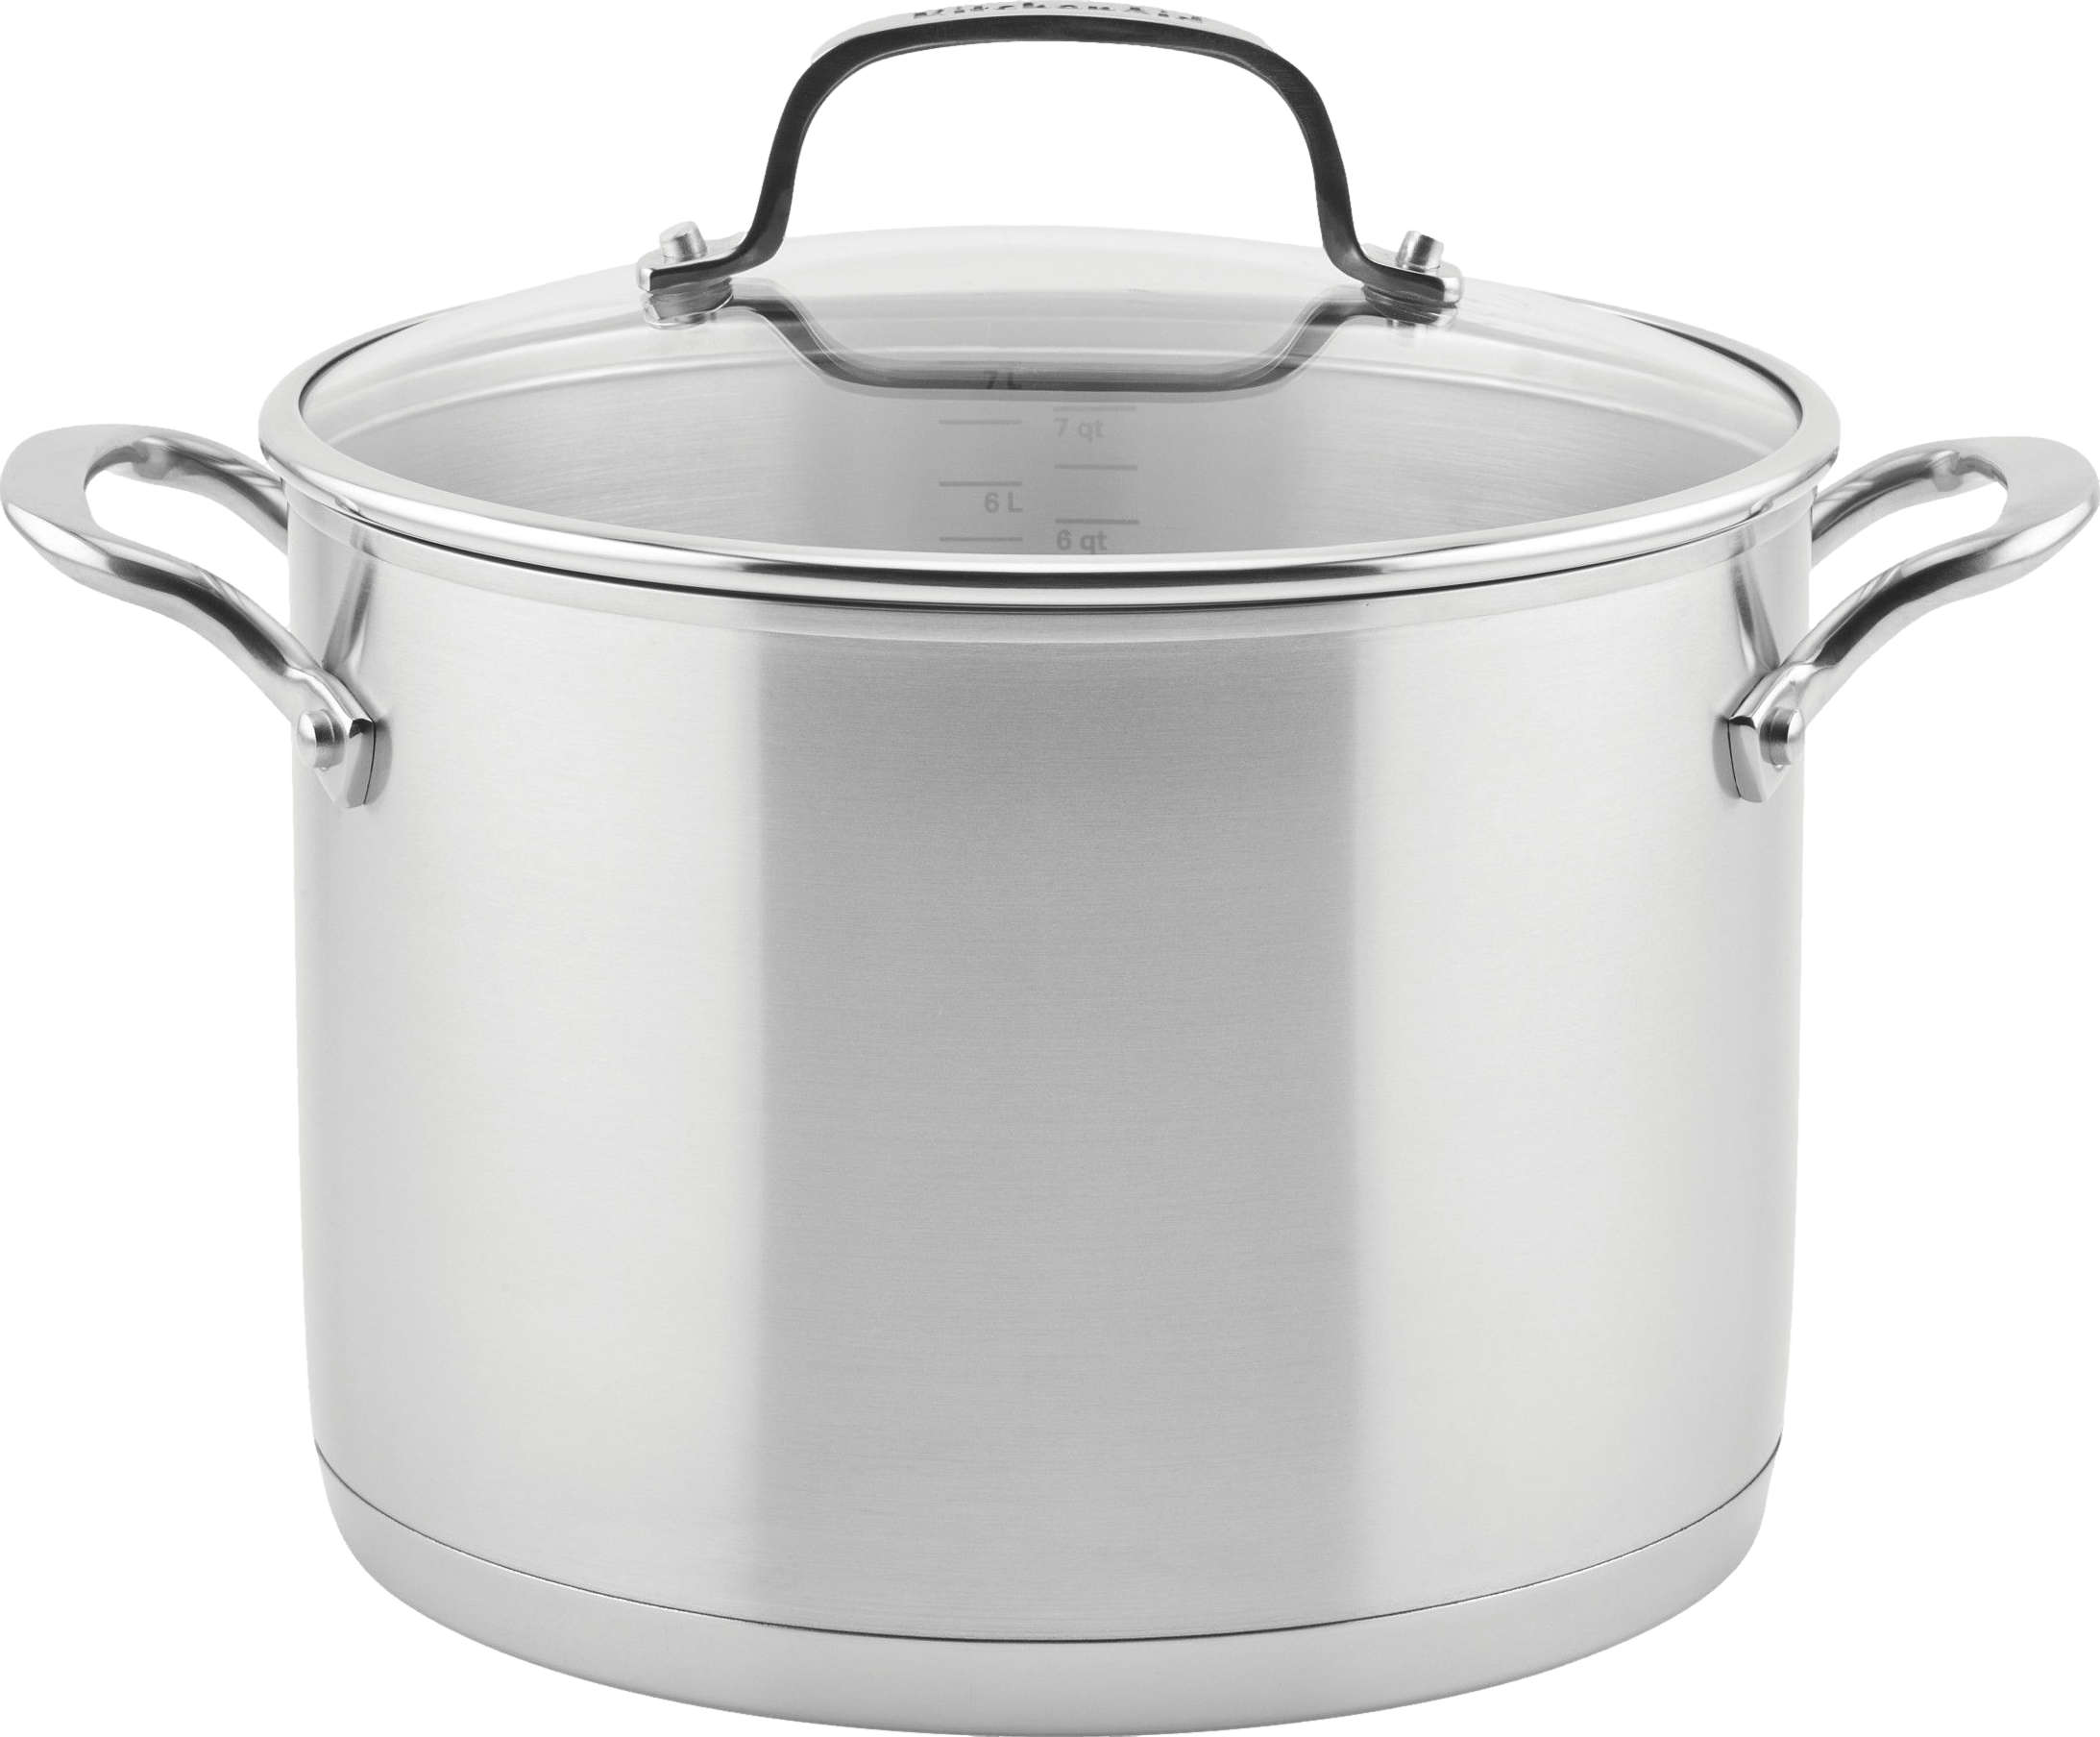 How to Choose the Right Size Stock Pot